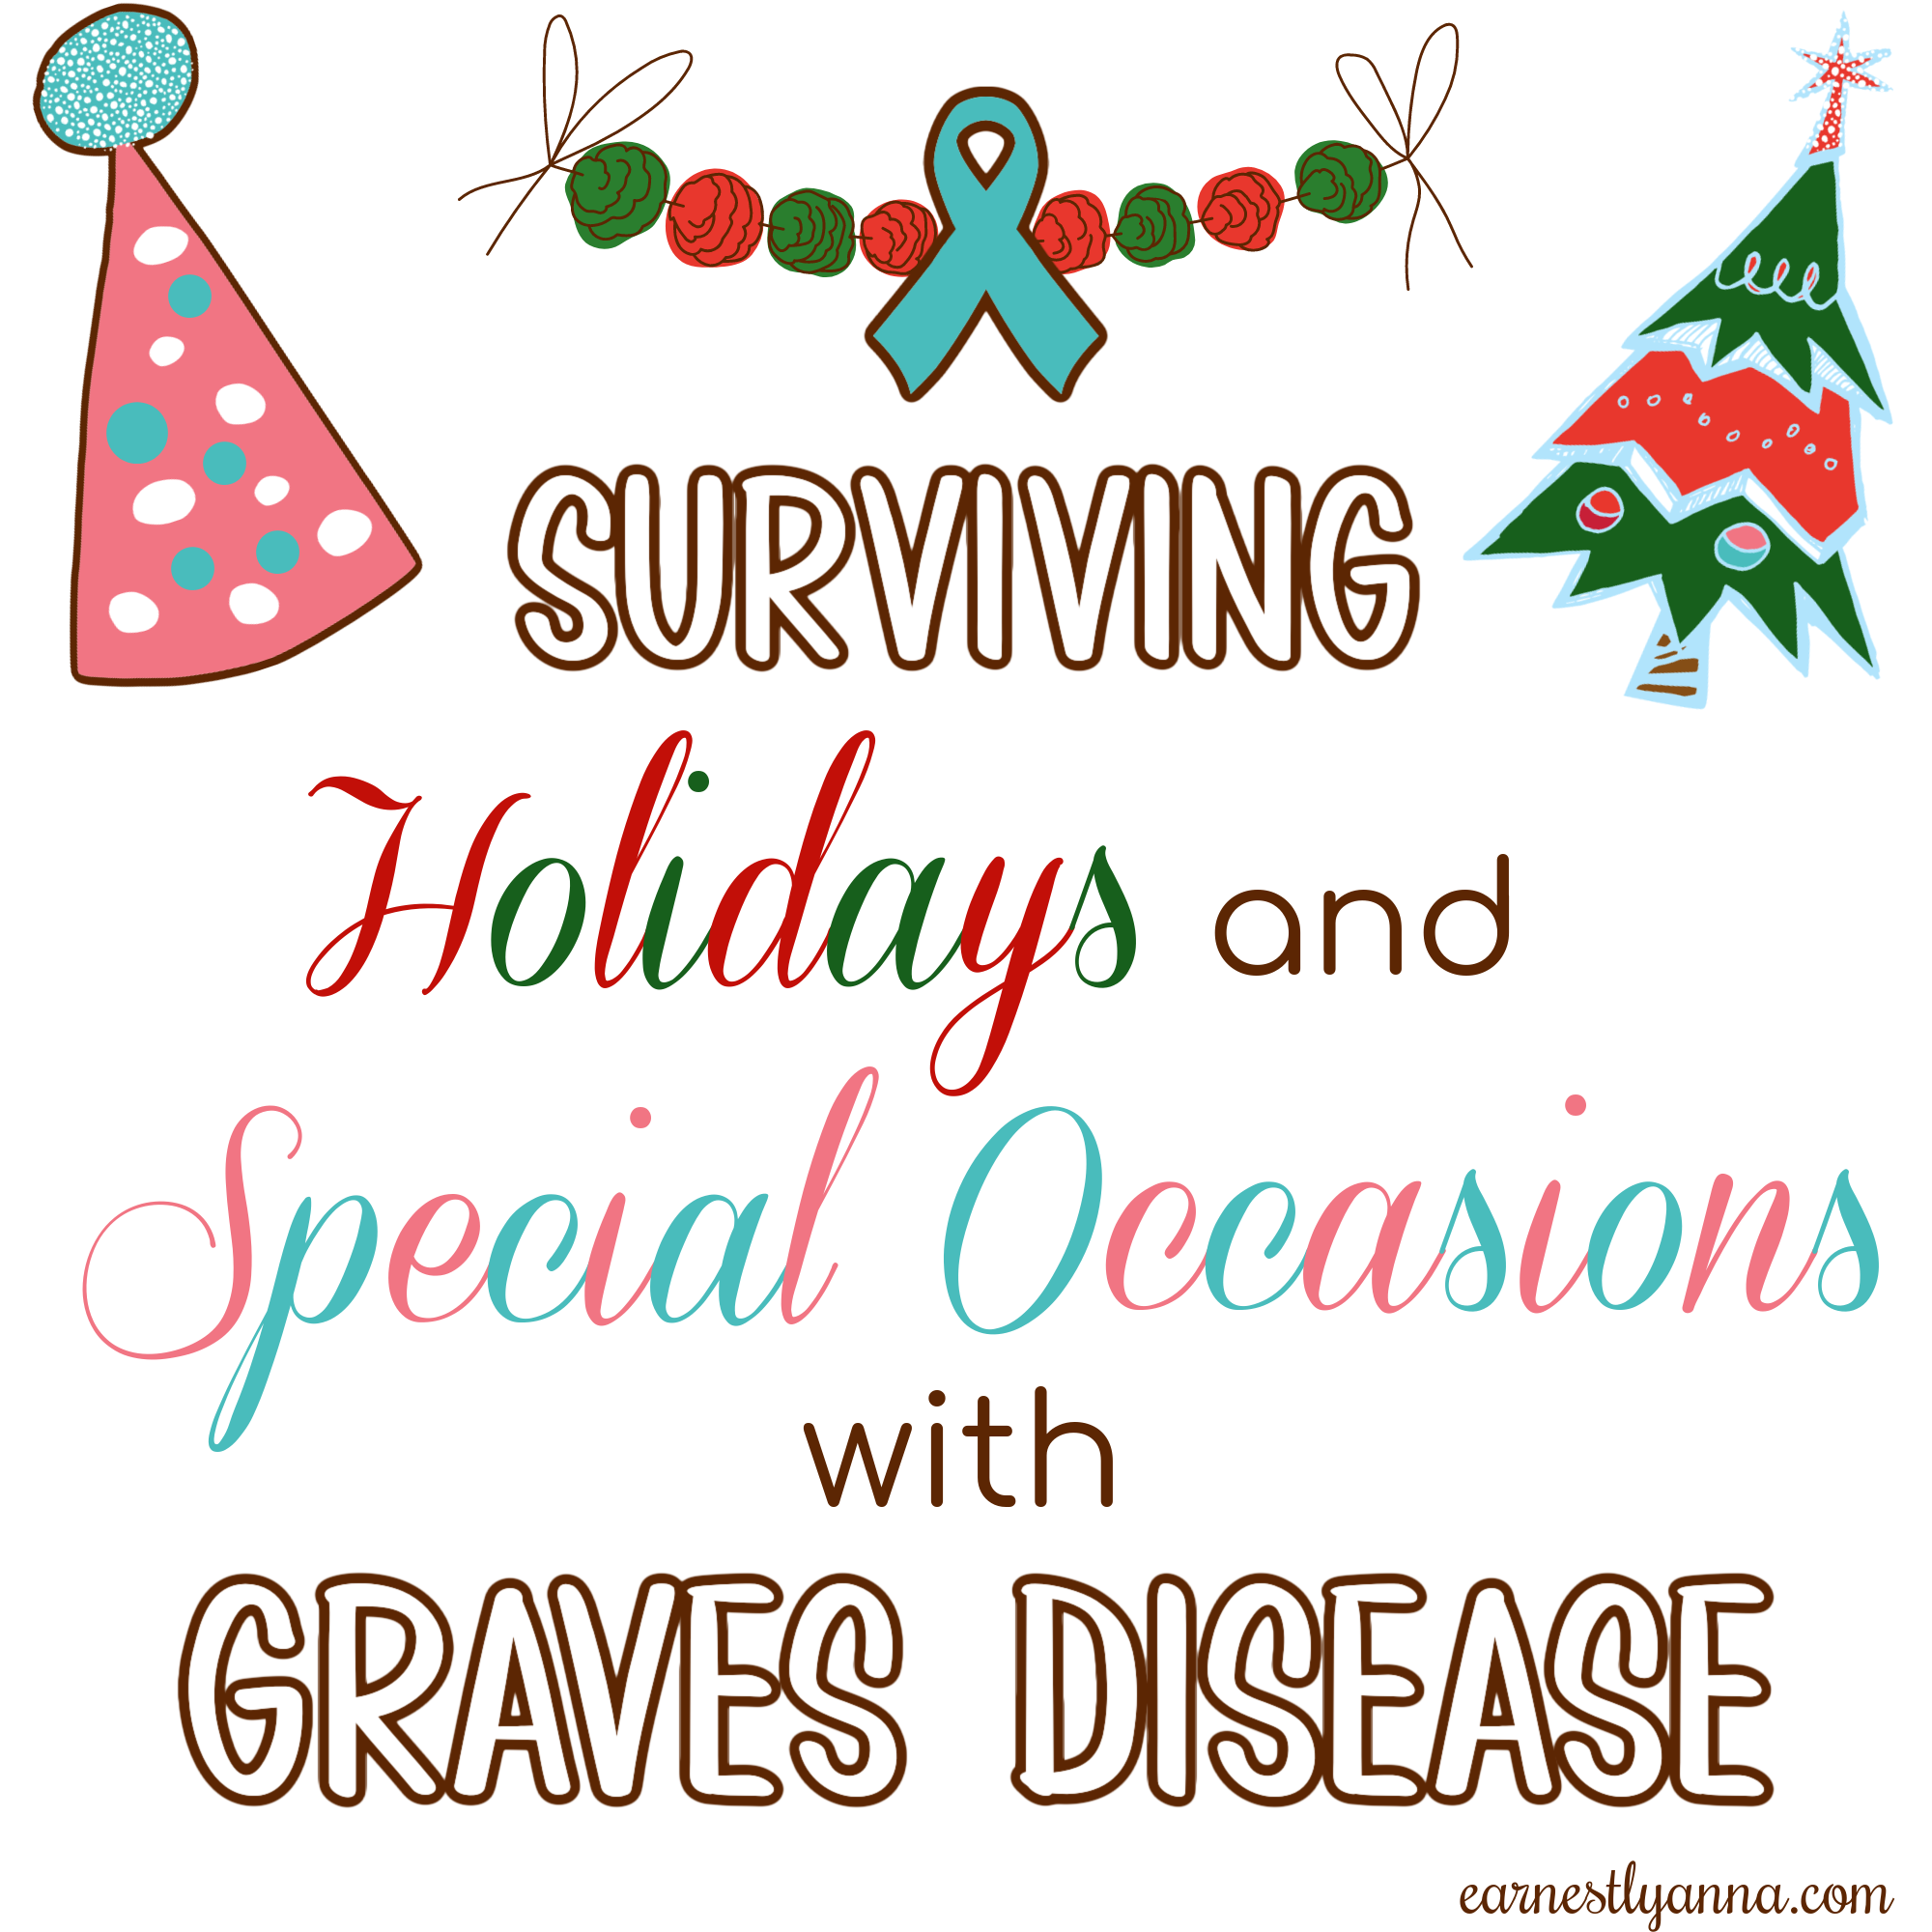 Surviving-Holidays-and-Special-Occasions-with-Graves-Disease